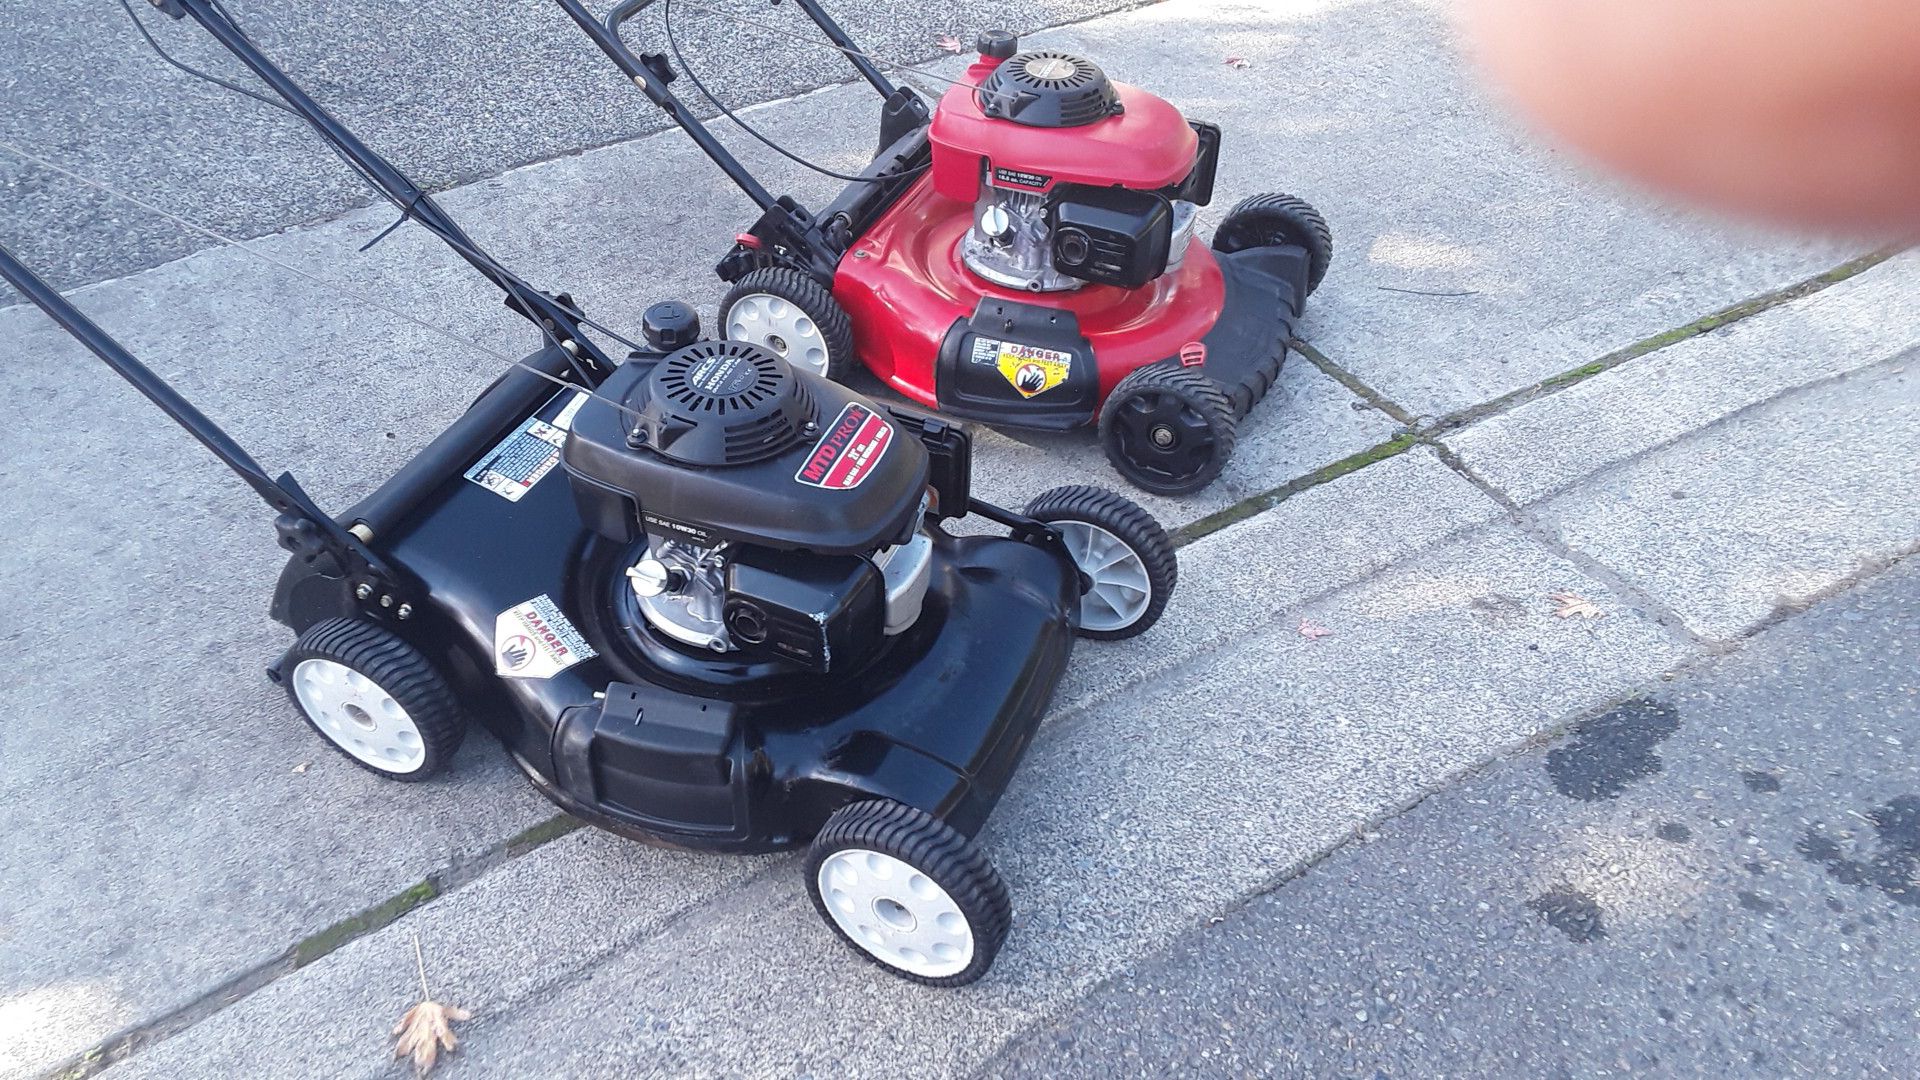 HONDA LAWN MOWER THE BLACK IS SELFPROLLED AND THE RED IS PUSH MOWER BOTH ARE WORKING GOOD FOR 120 $ FOR BOTH